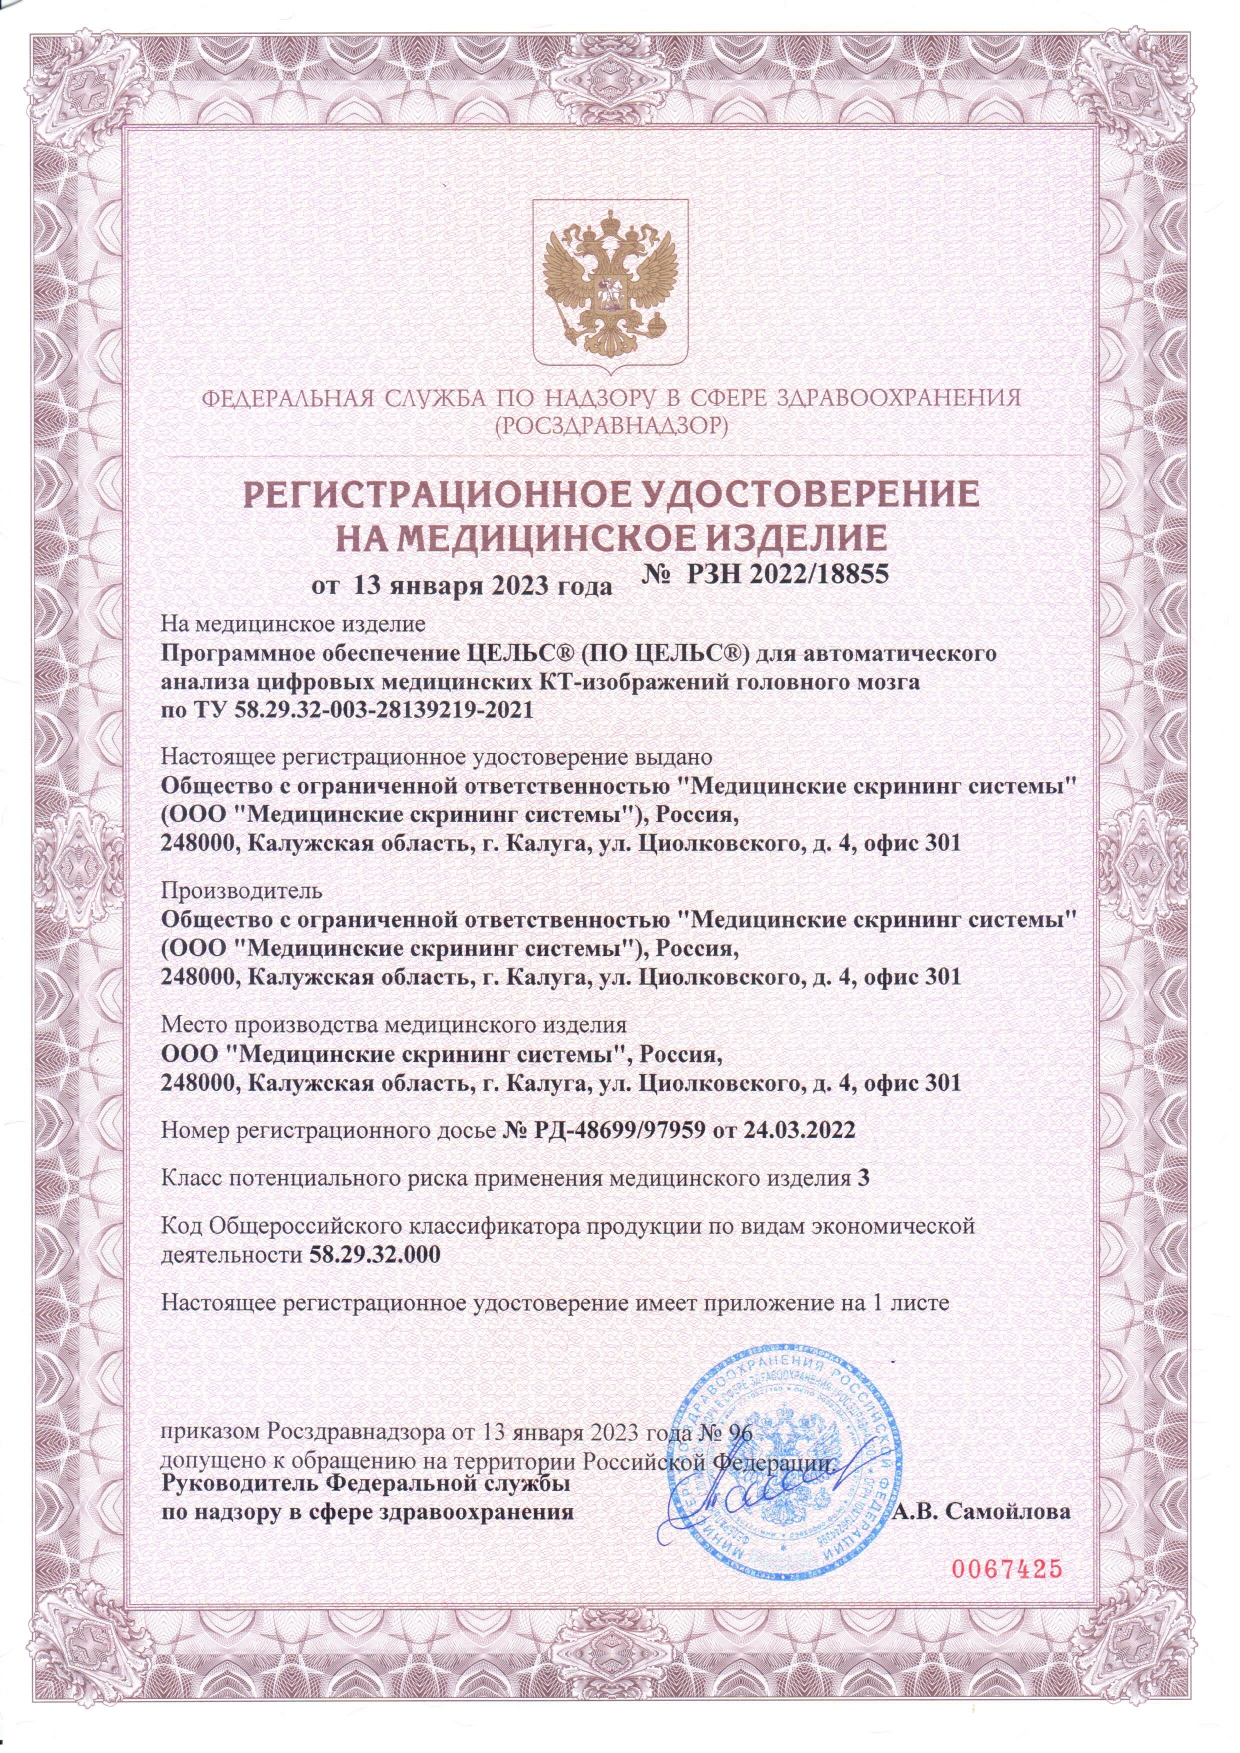 Registration certificate of a medical device